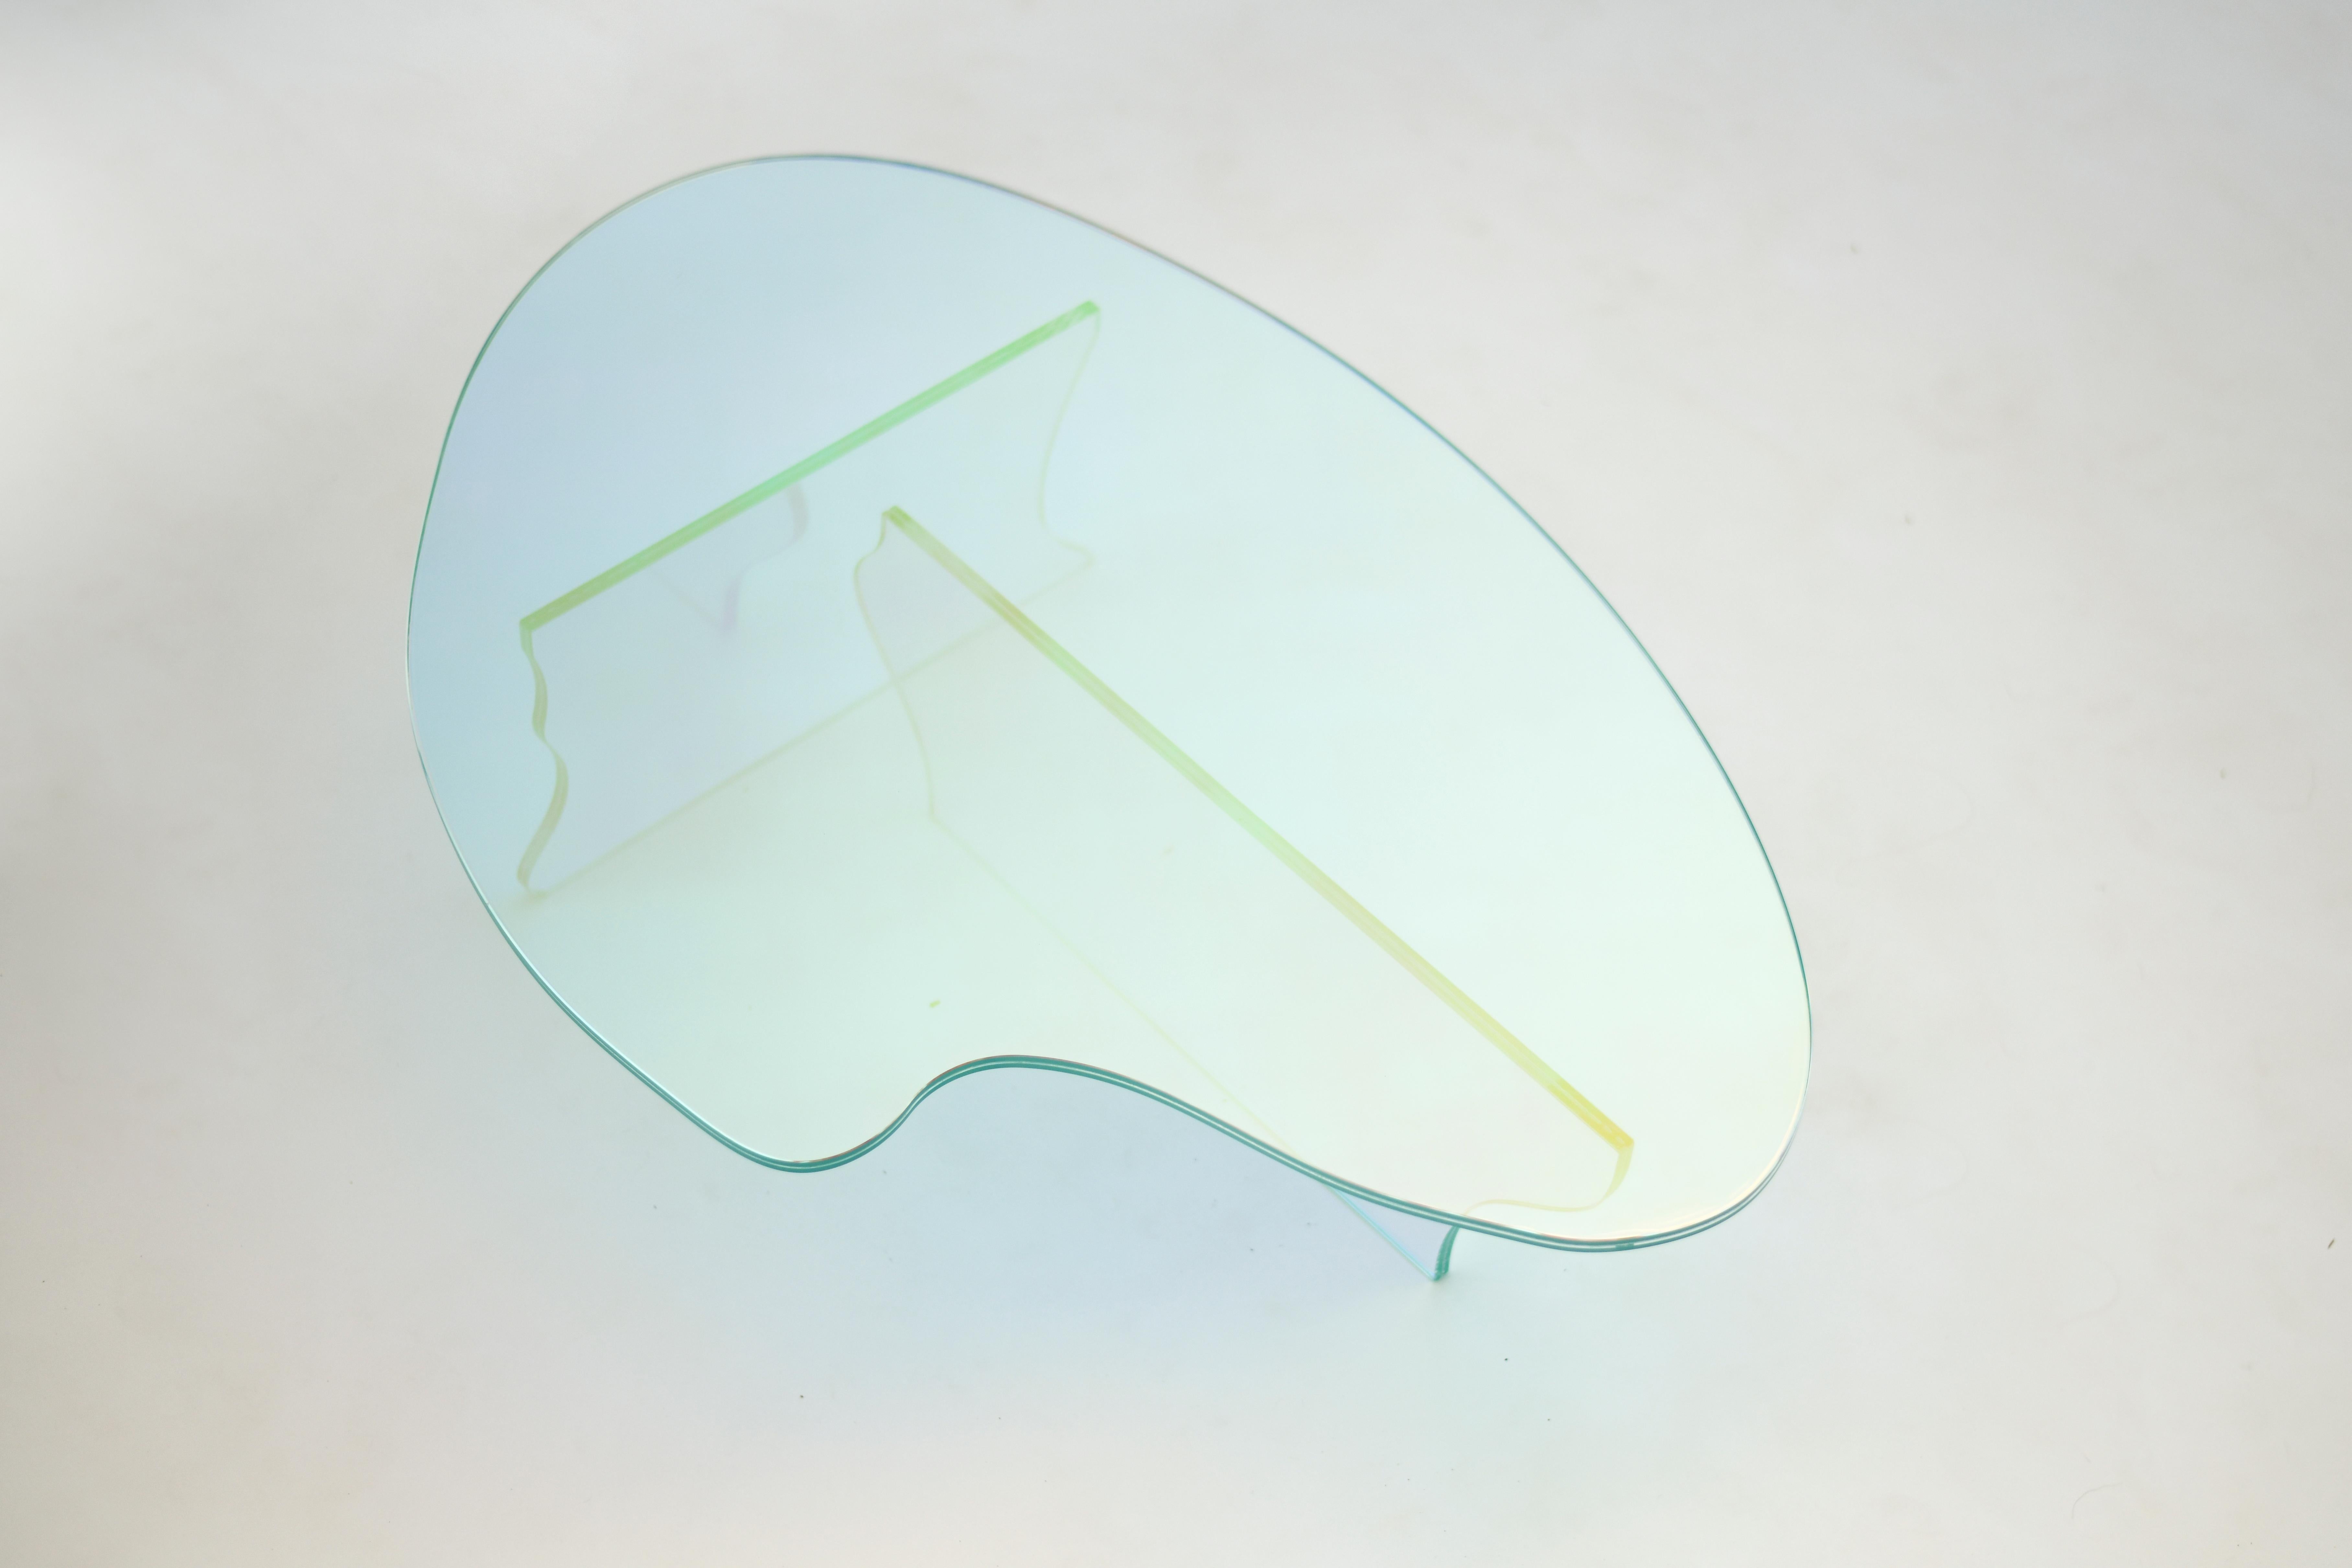 Glass table by Brajak Vitberg
Materials: Glass, dichroic film
Dimensions: 86 x 58 x 20 cm

Bijelic and Brajak are two architects from Ljubljana, Slovenia.
They are striving to design craft elements and make them timeless through experimental